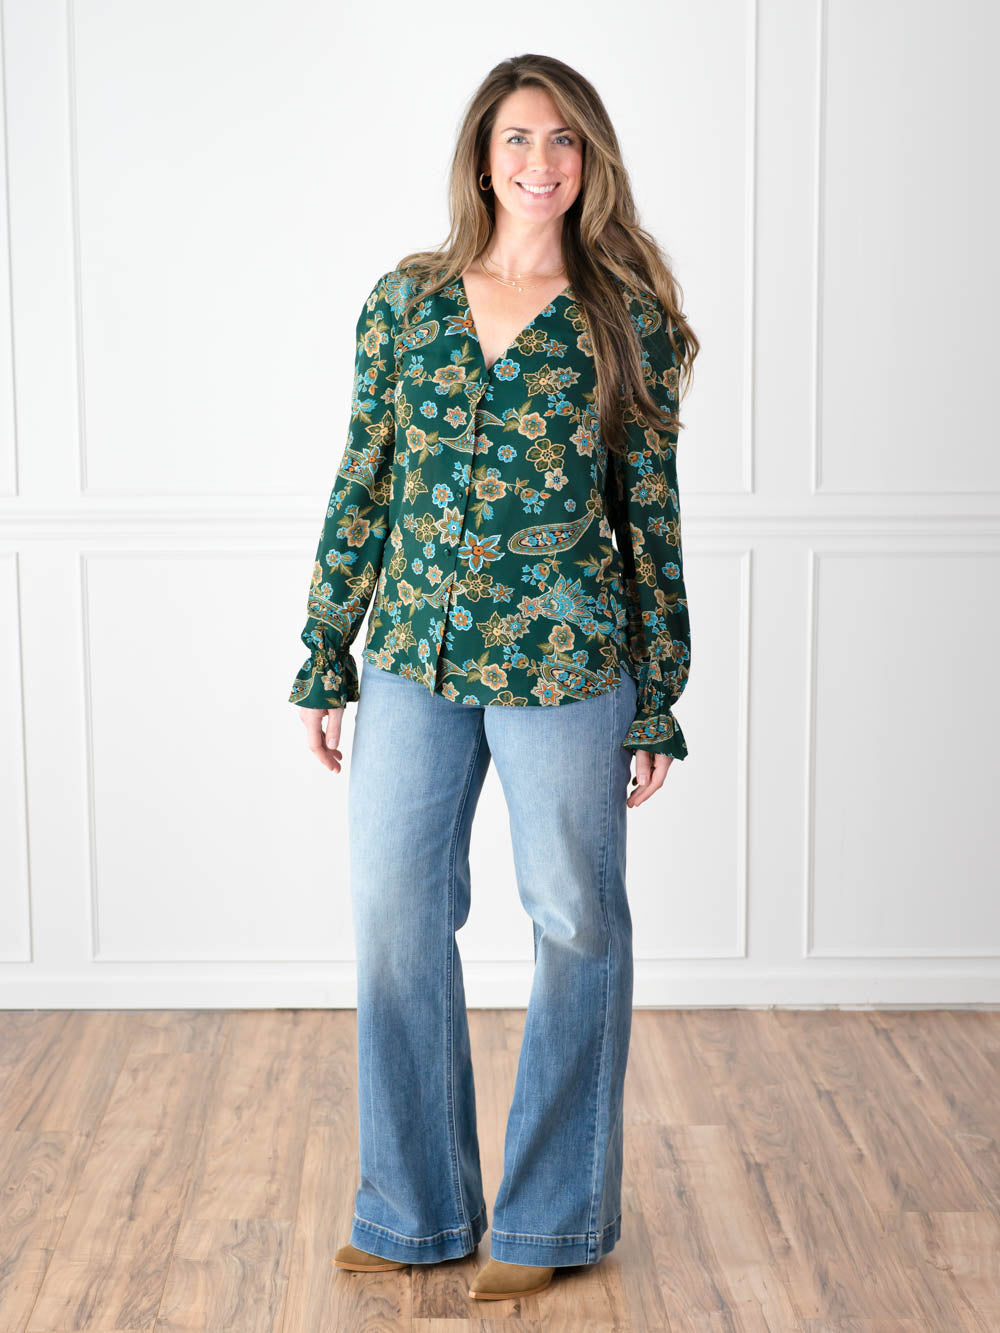 Paisley Blouse Outfit for Tall Women